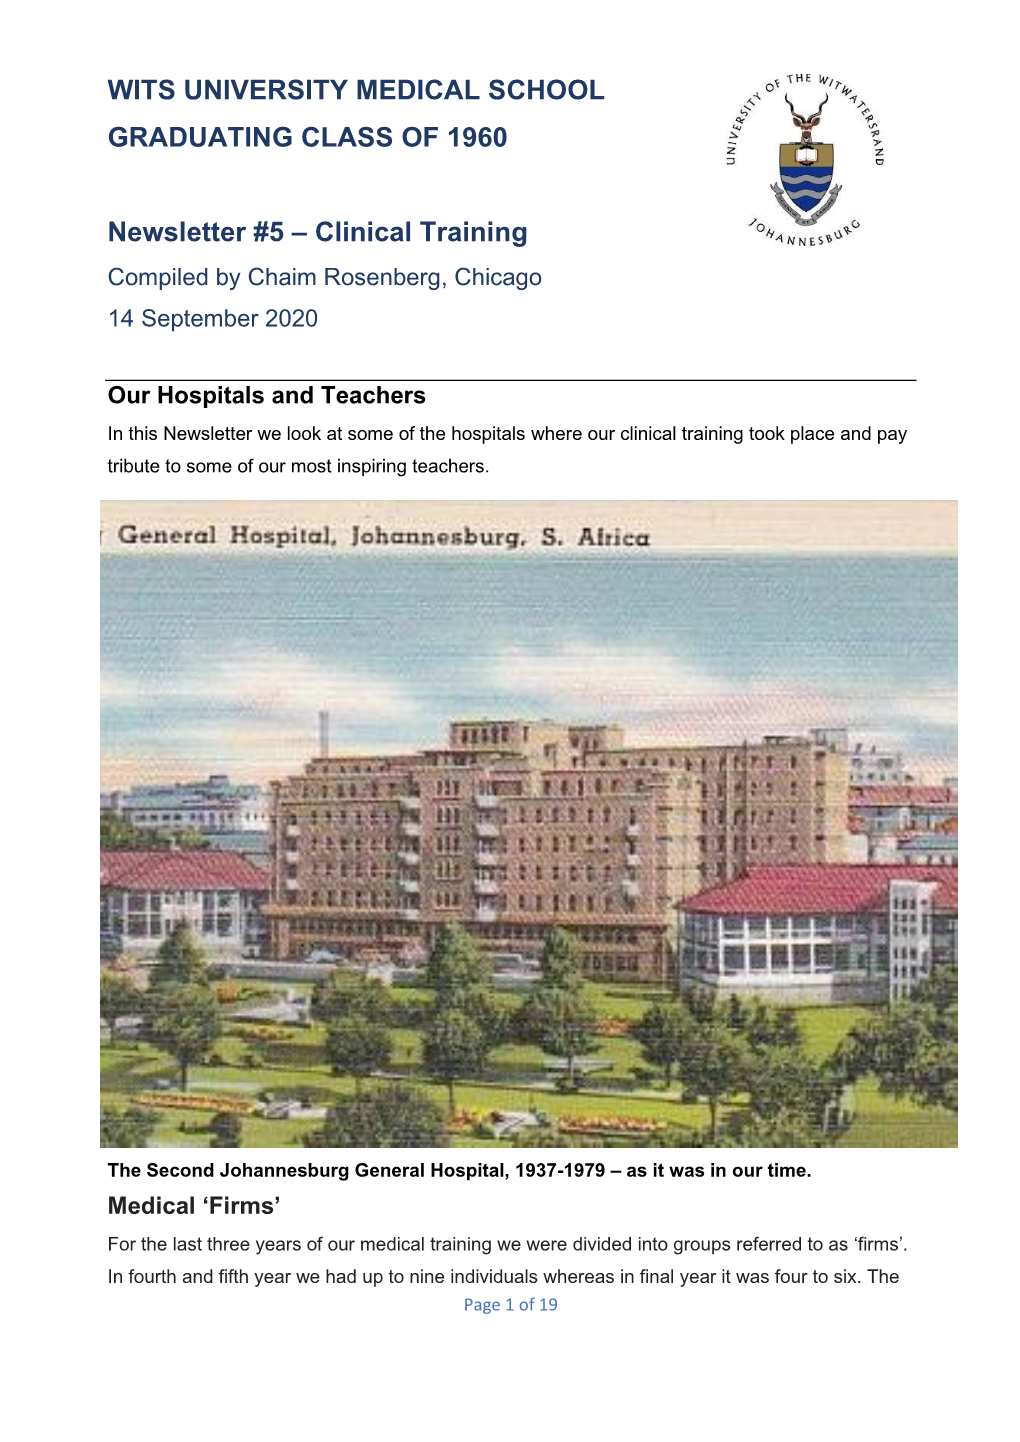 WITS UNIVERSITY MEDICAL SCHOOL GRADUATING CLASS of 1960 Newsletter #5 – Clinical Training